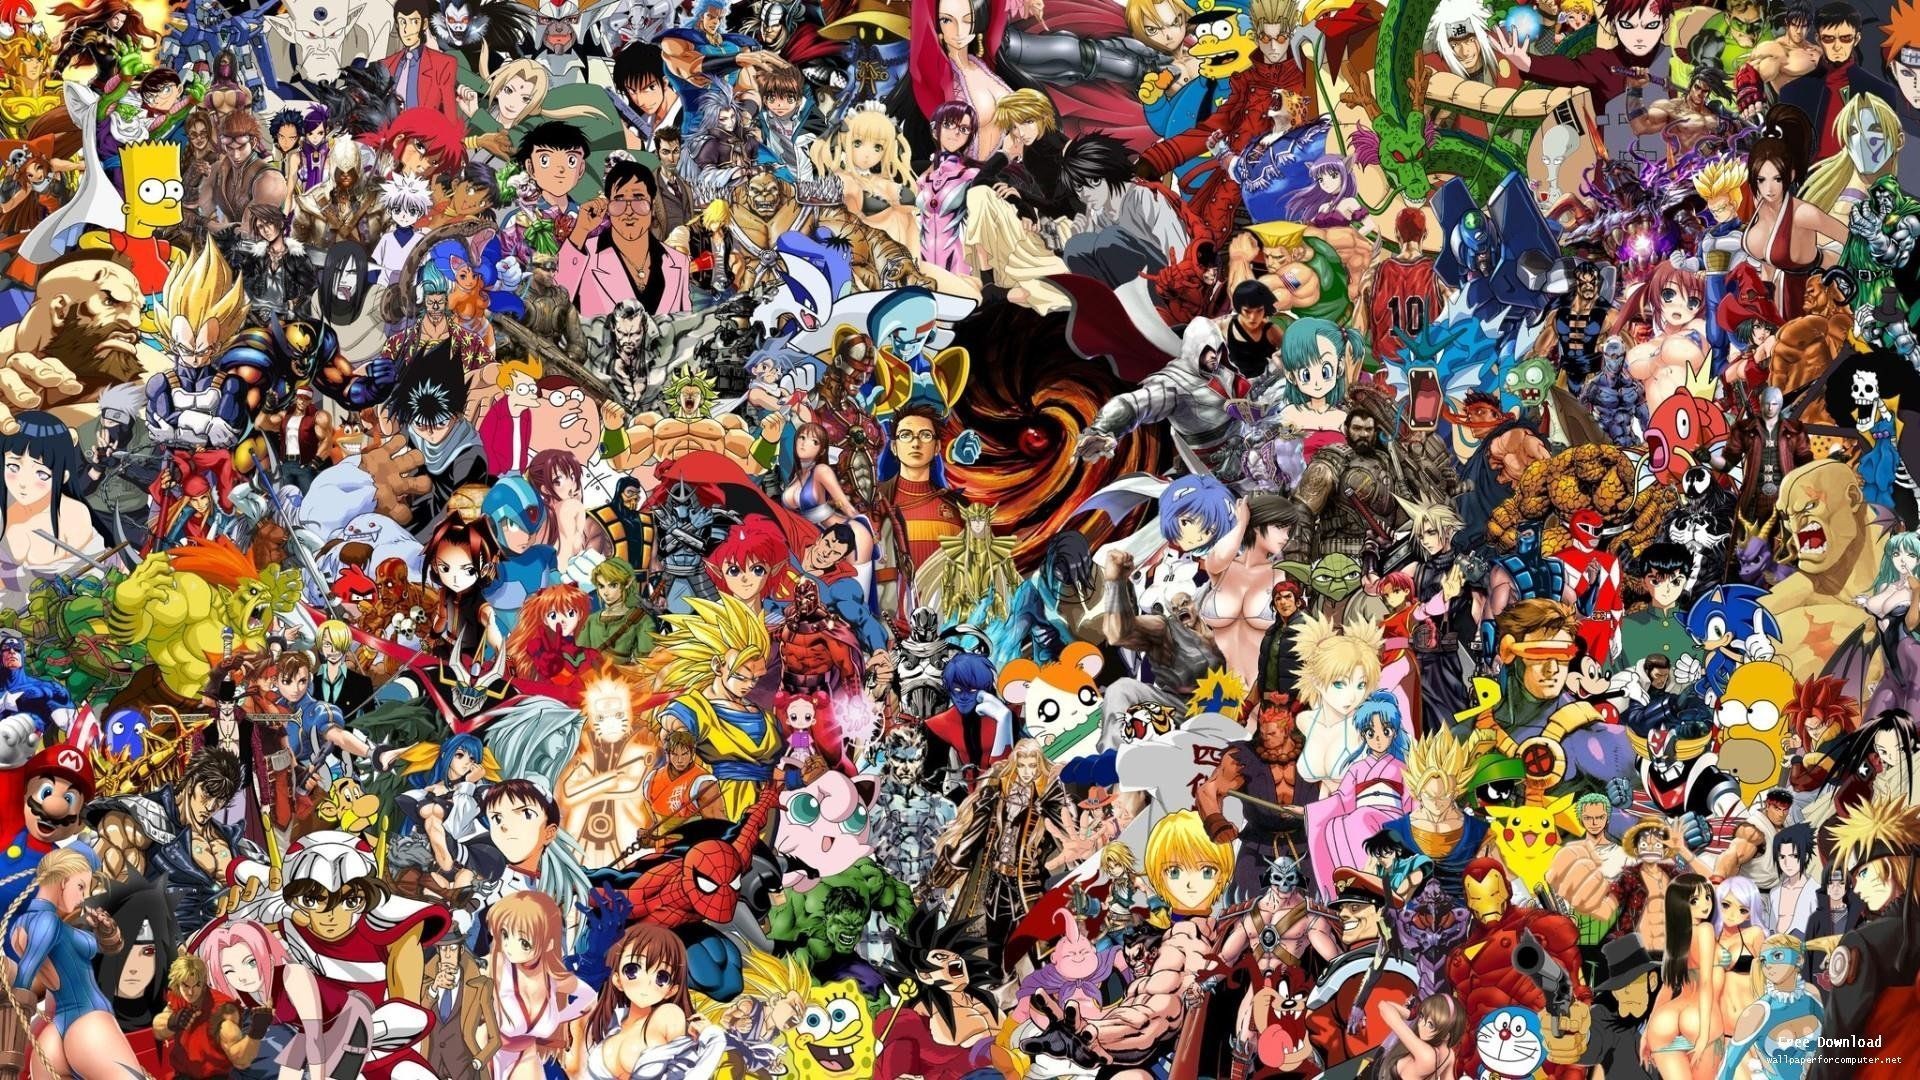 Best Gaming Wallpaper With high-resolution 1920X1080 pixel. You can use this wallpaper for your Desktop Computer Backgrounds, Mac Wallpapers, Android Lock screen or iPhone Screensavers and another smartphone device